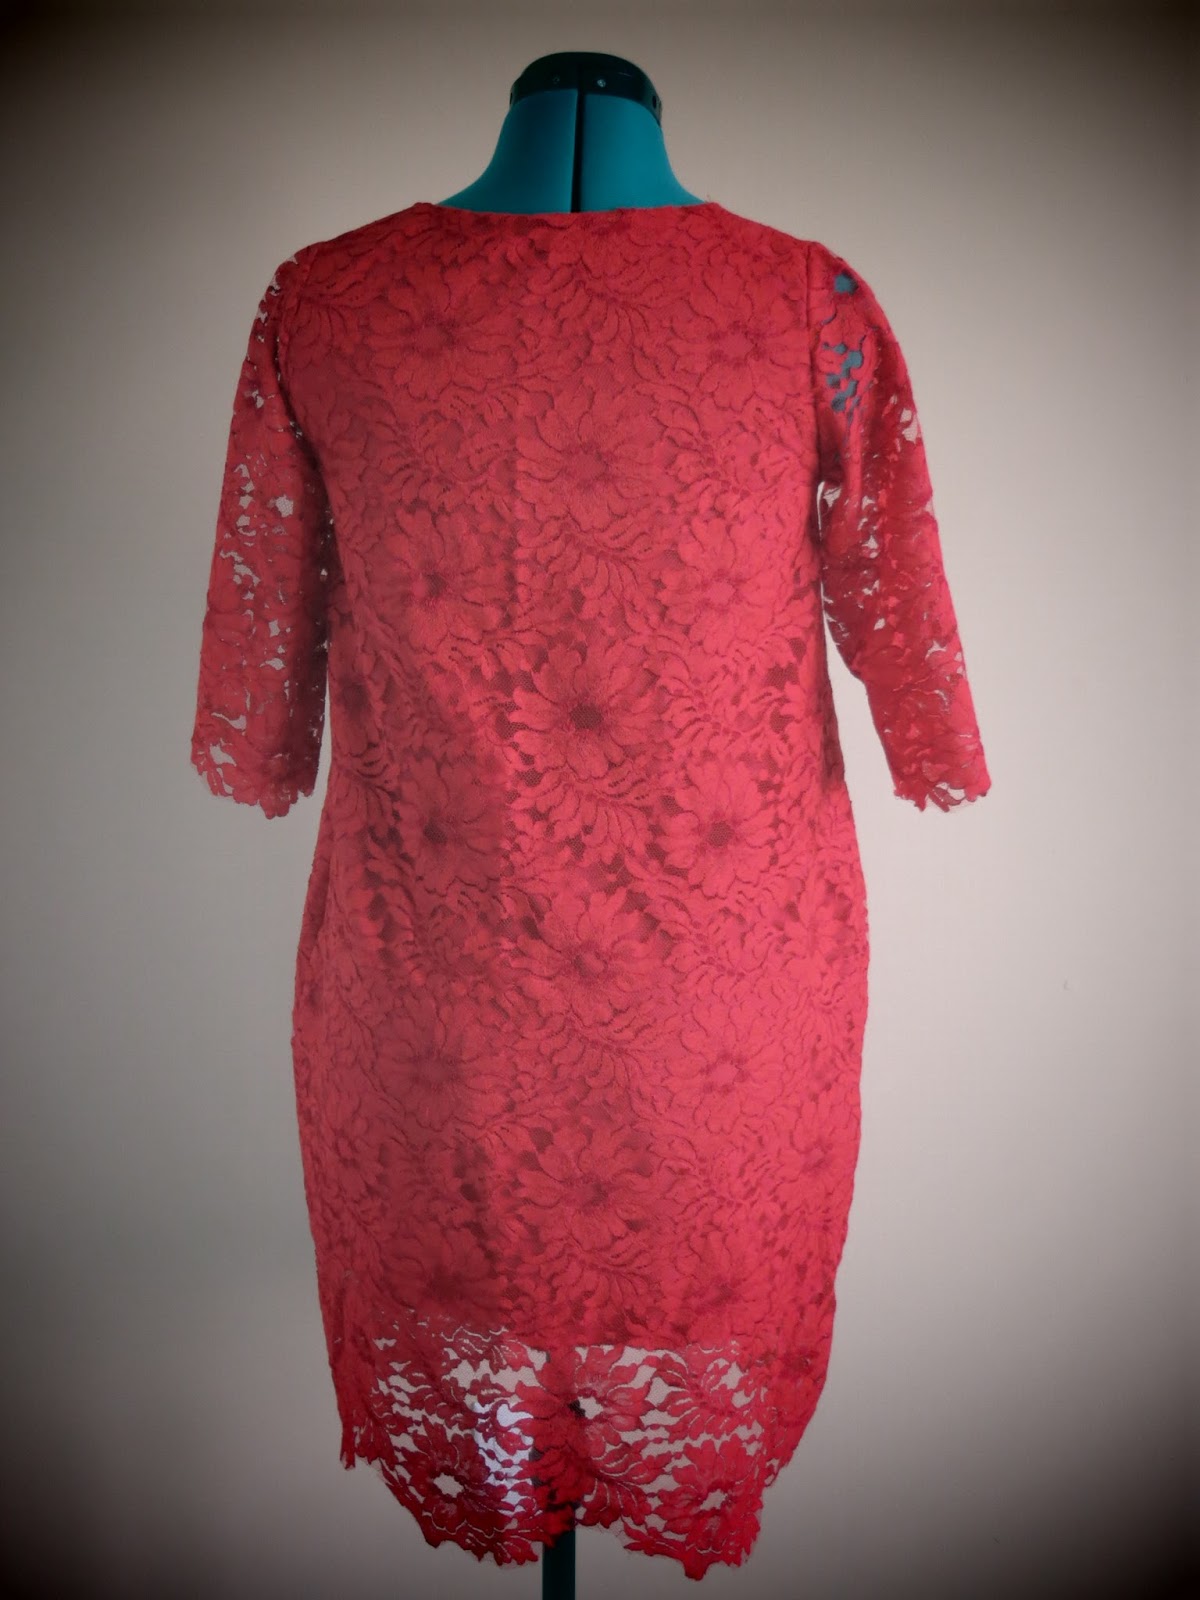 The Confident Journal: Dolce and Gabbana Inspired: Red Lace Tunic Dress